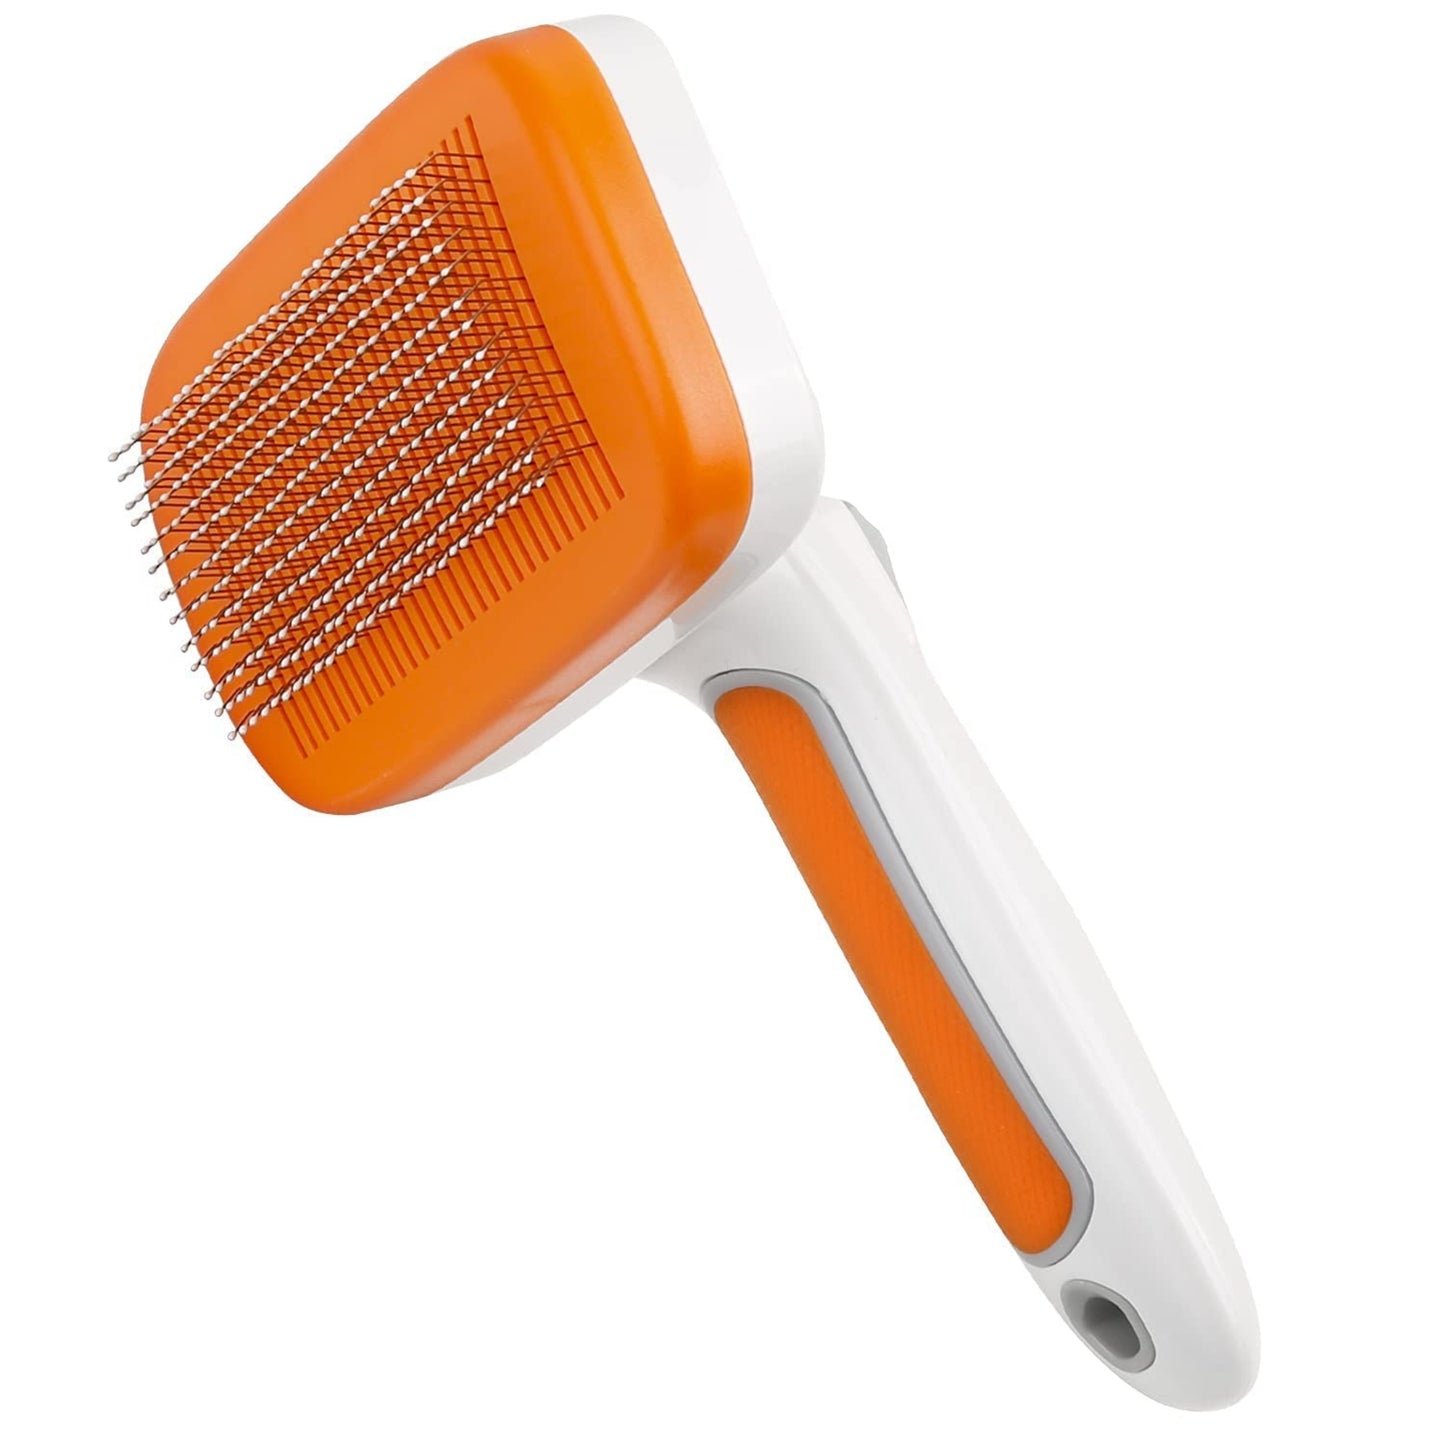 Foodie Puppies Orange Slicker Brush for Puppies, Dogs, & Cats - Large